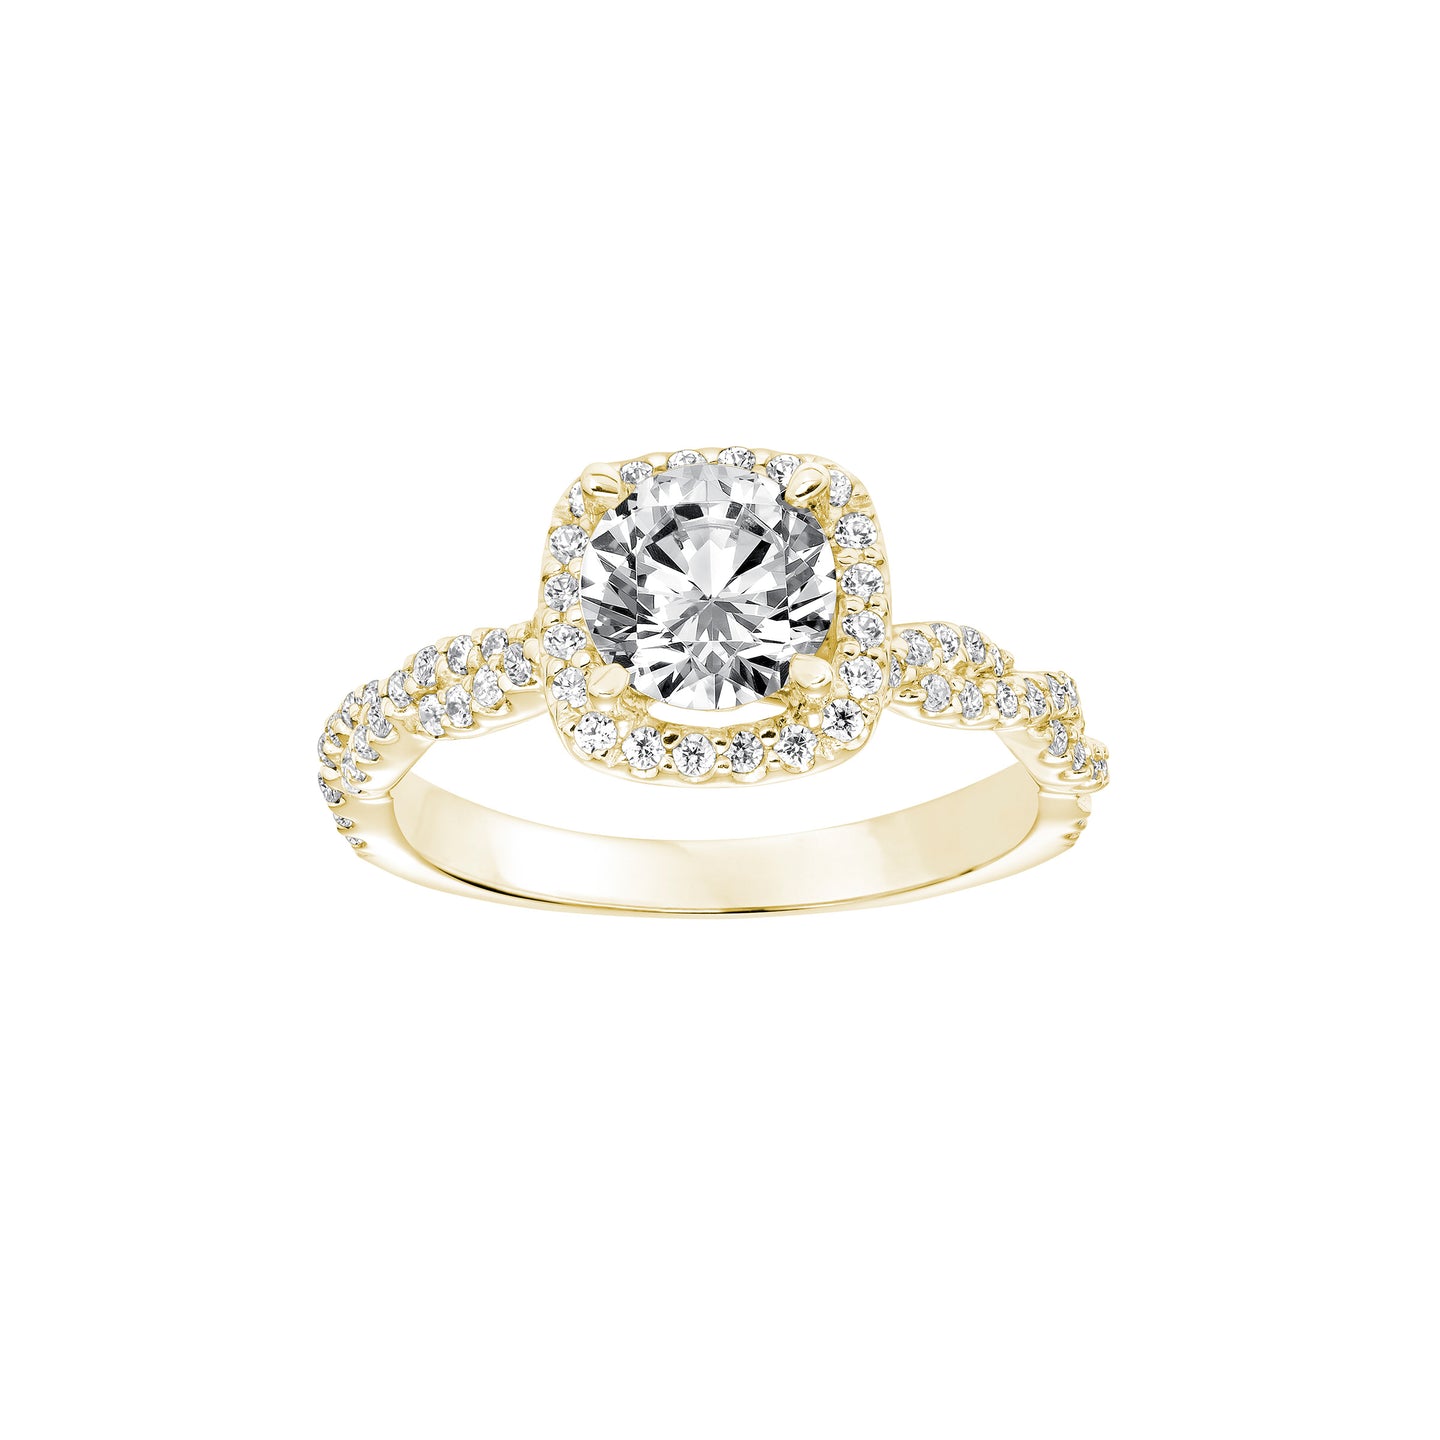 Fink's Exclusive 14K Yellow Gold Round Diamond Halo and Diamond Engagement Ring